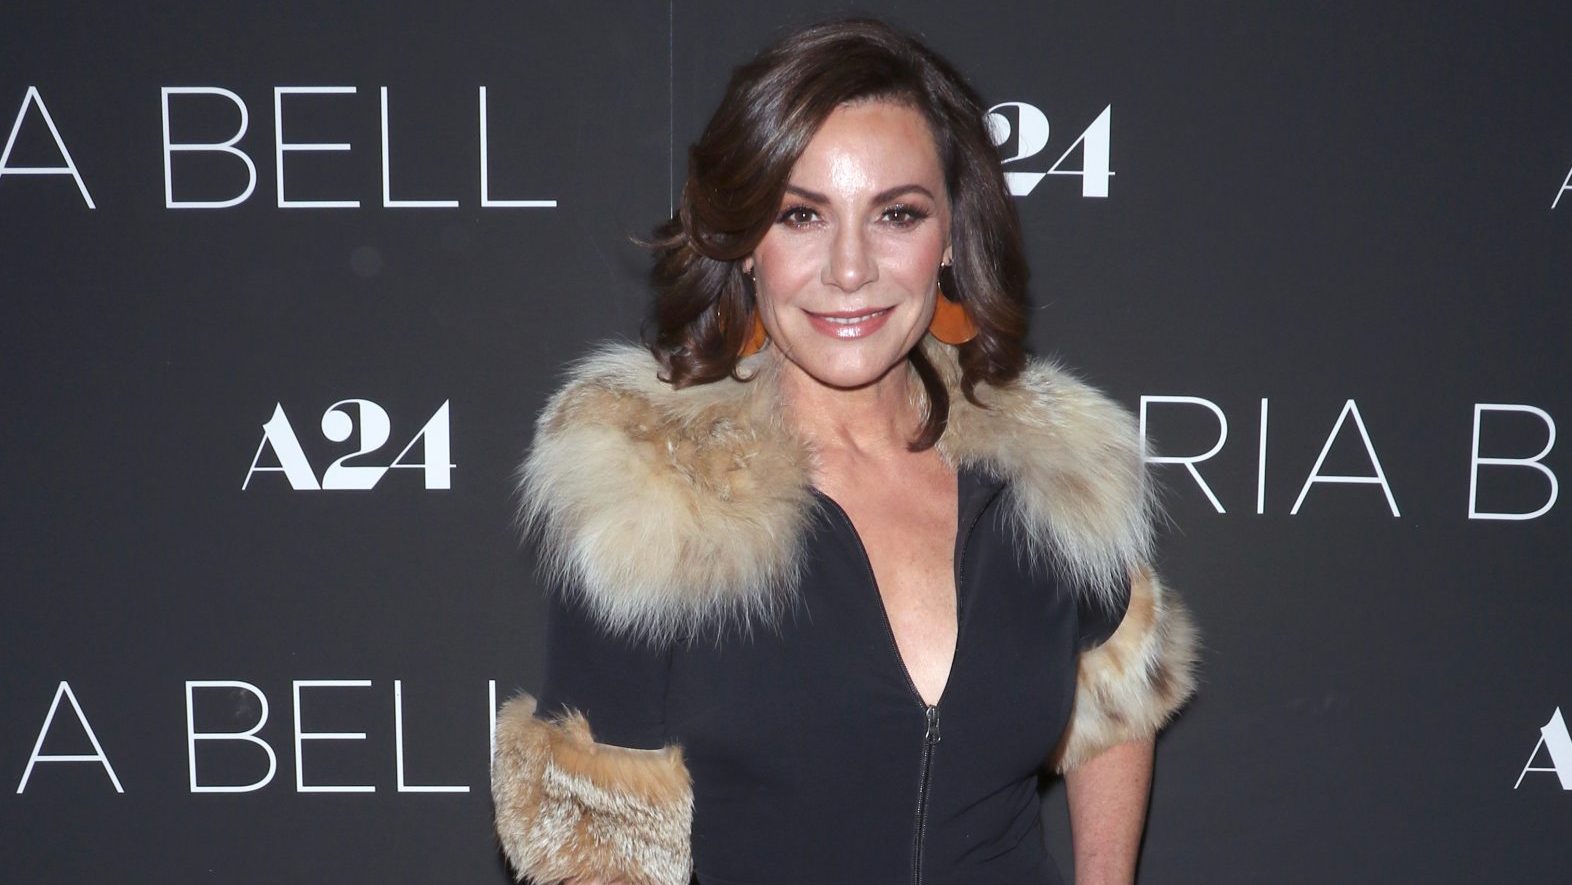 1572px x 885px - 'RHONY': Luann de Lesseps Expects 'Shifts in Alliances' This Season